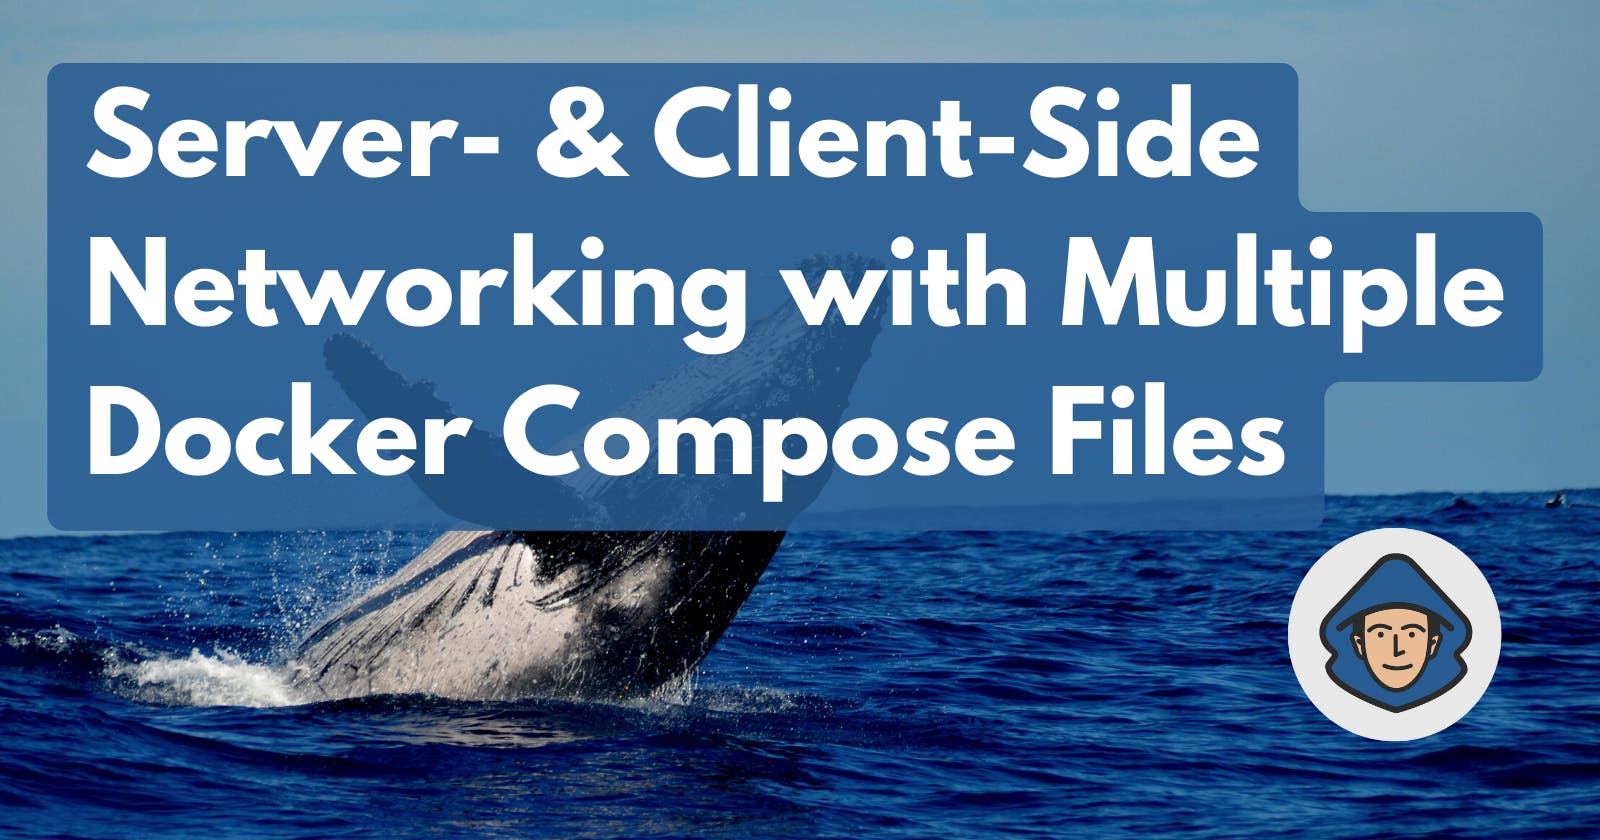 Server- & Client-Side Networking with Multiple Docker Compose Files